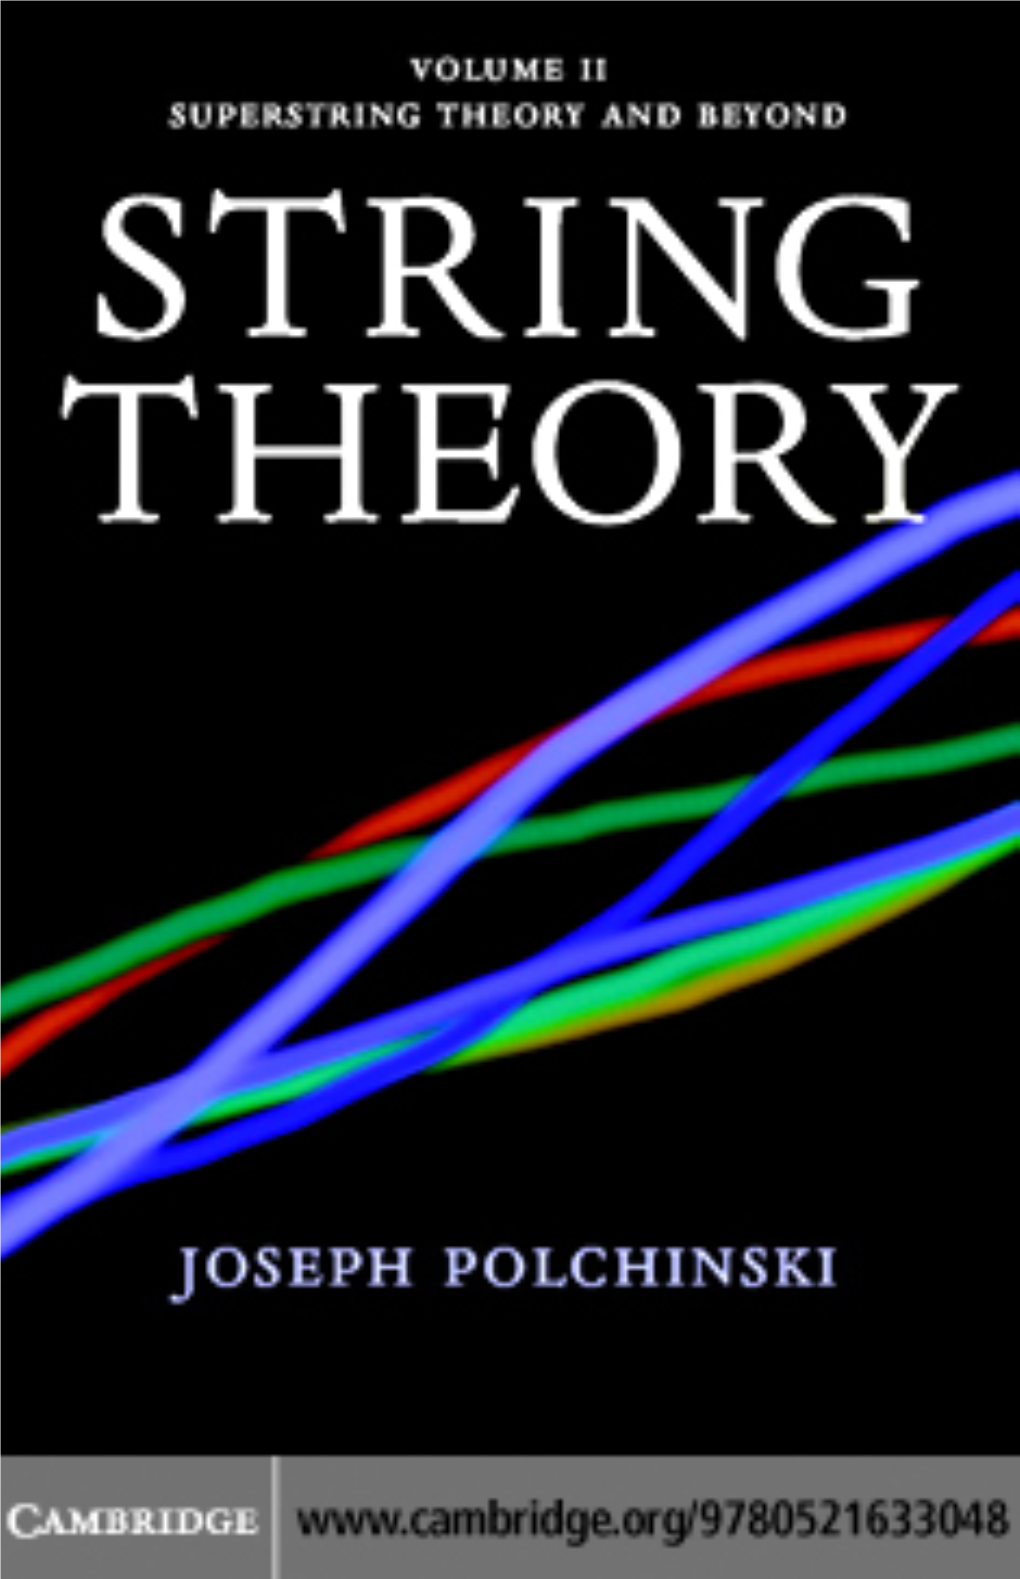 String Theory. Volume II, Superstring Theory and Beyond